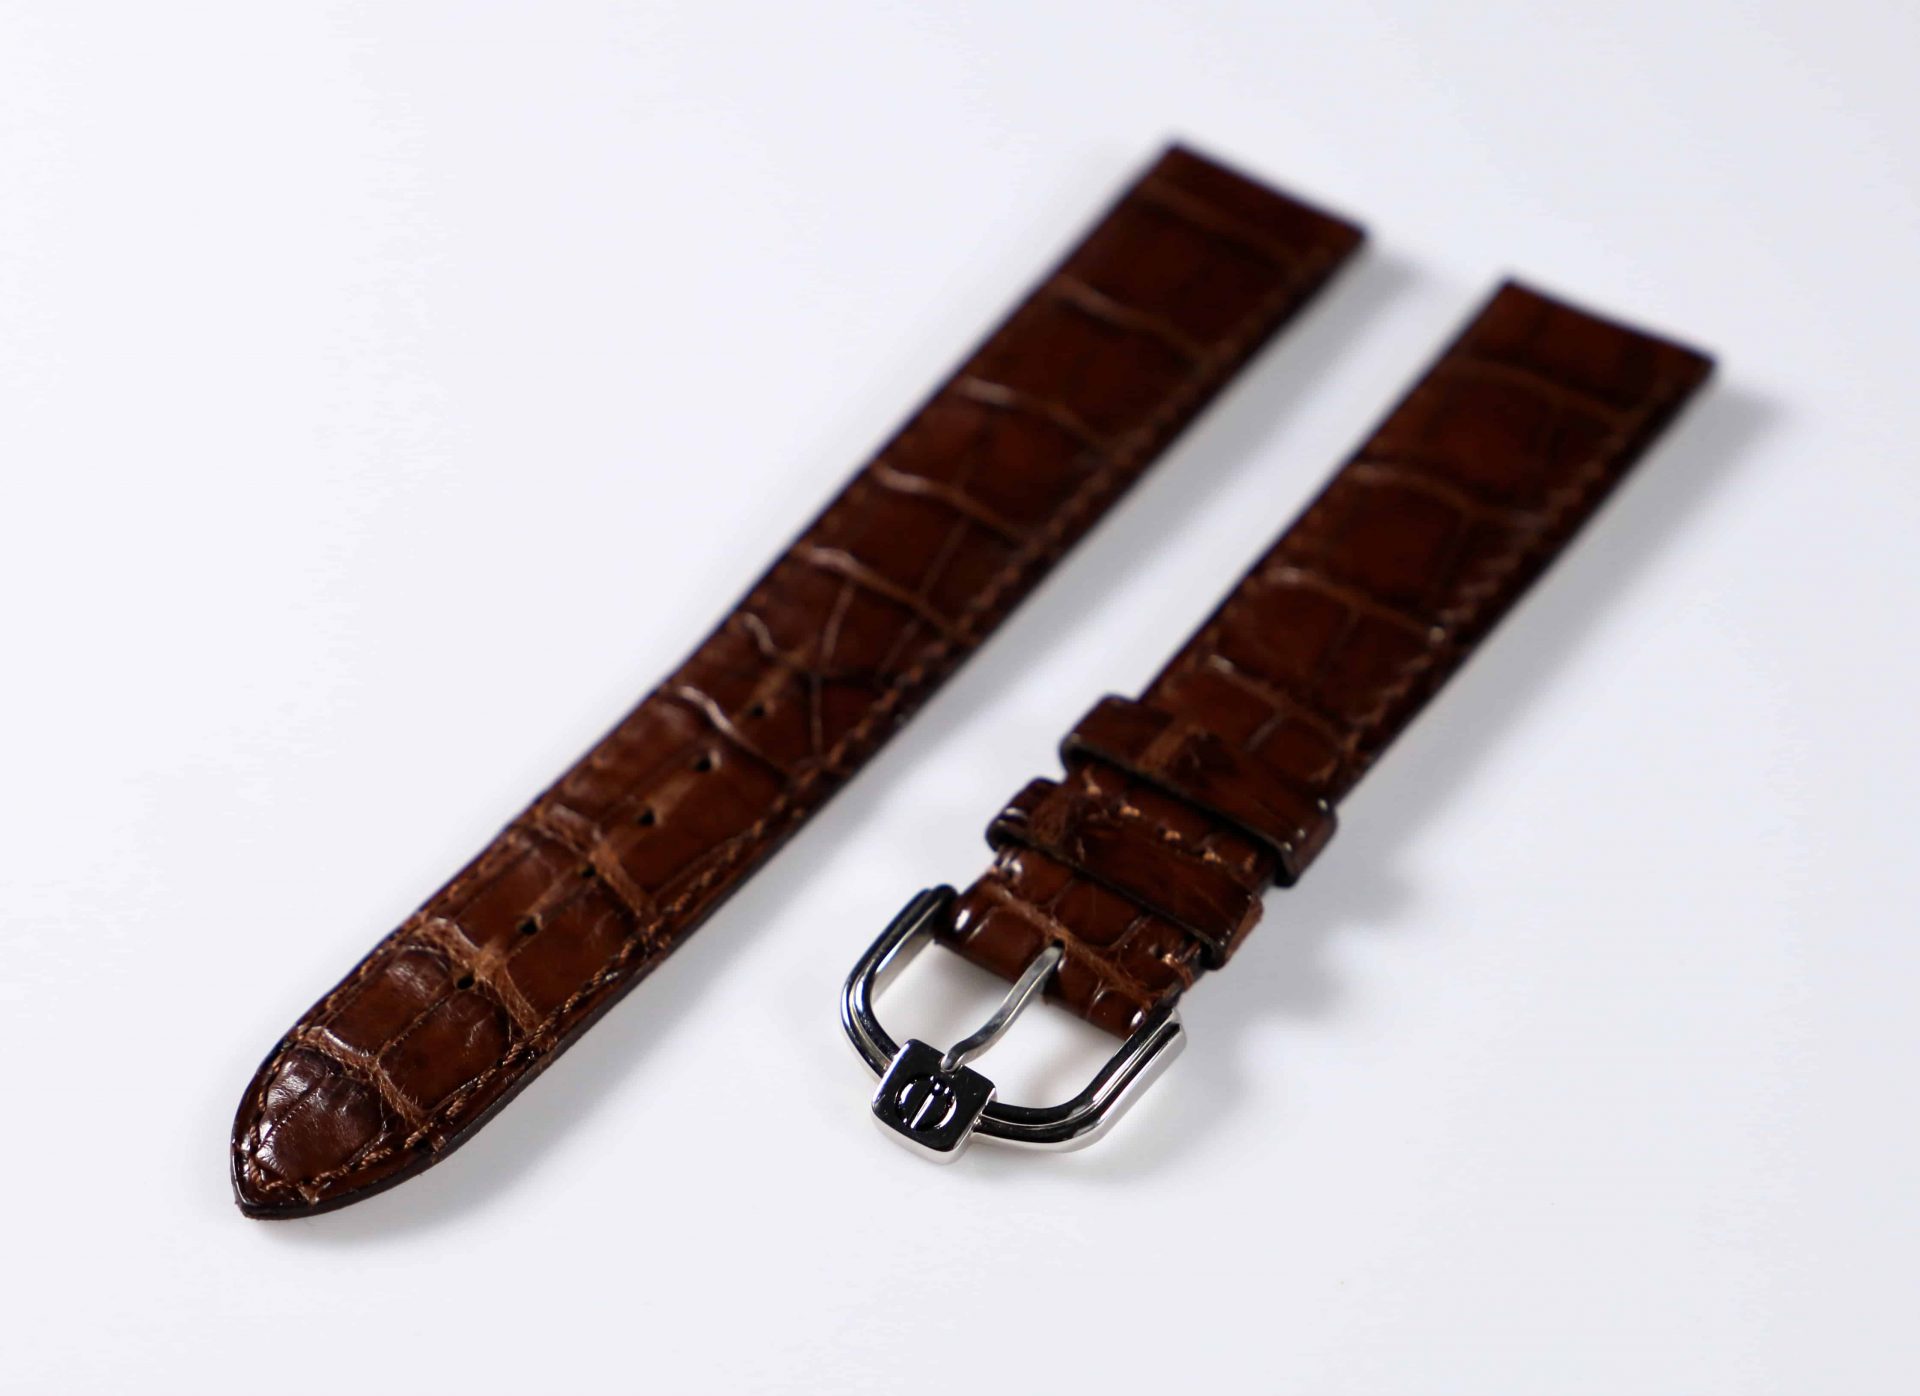 Dunhill 18MM Alligator Strap with Dunhill Tang Buckle - Rare Watch Parts